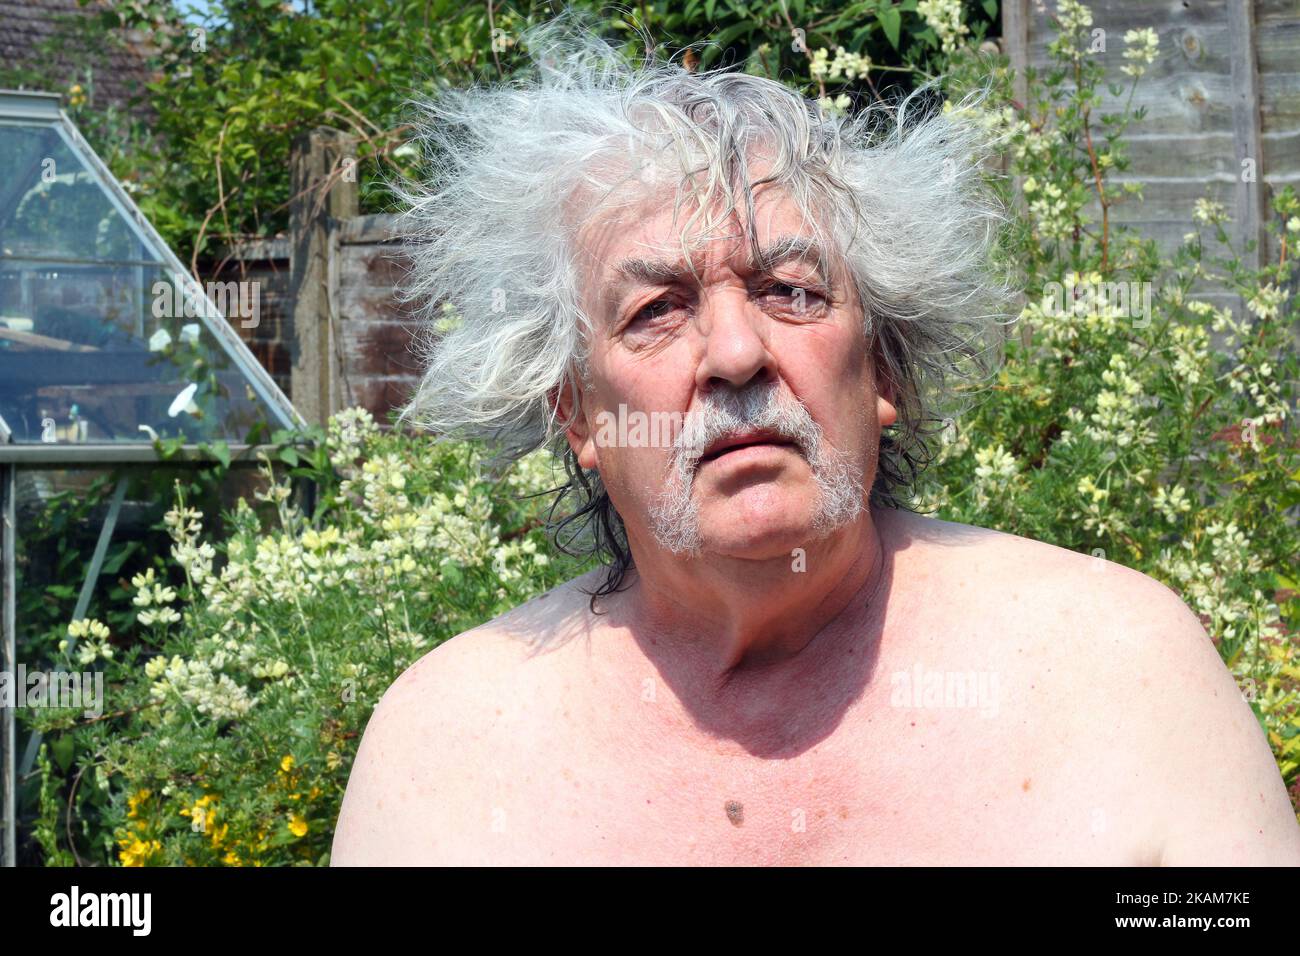 Bad hair day. Senior man with very untidy hair. Funny. Stock Photo